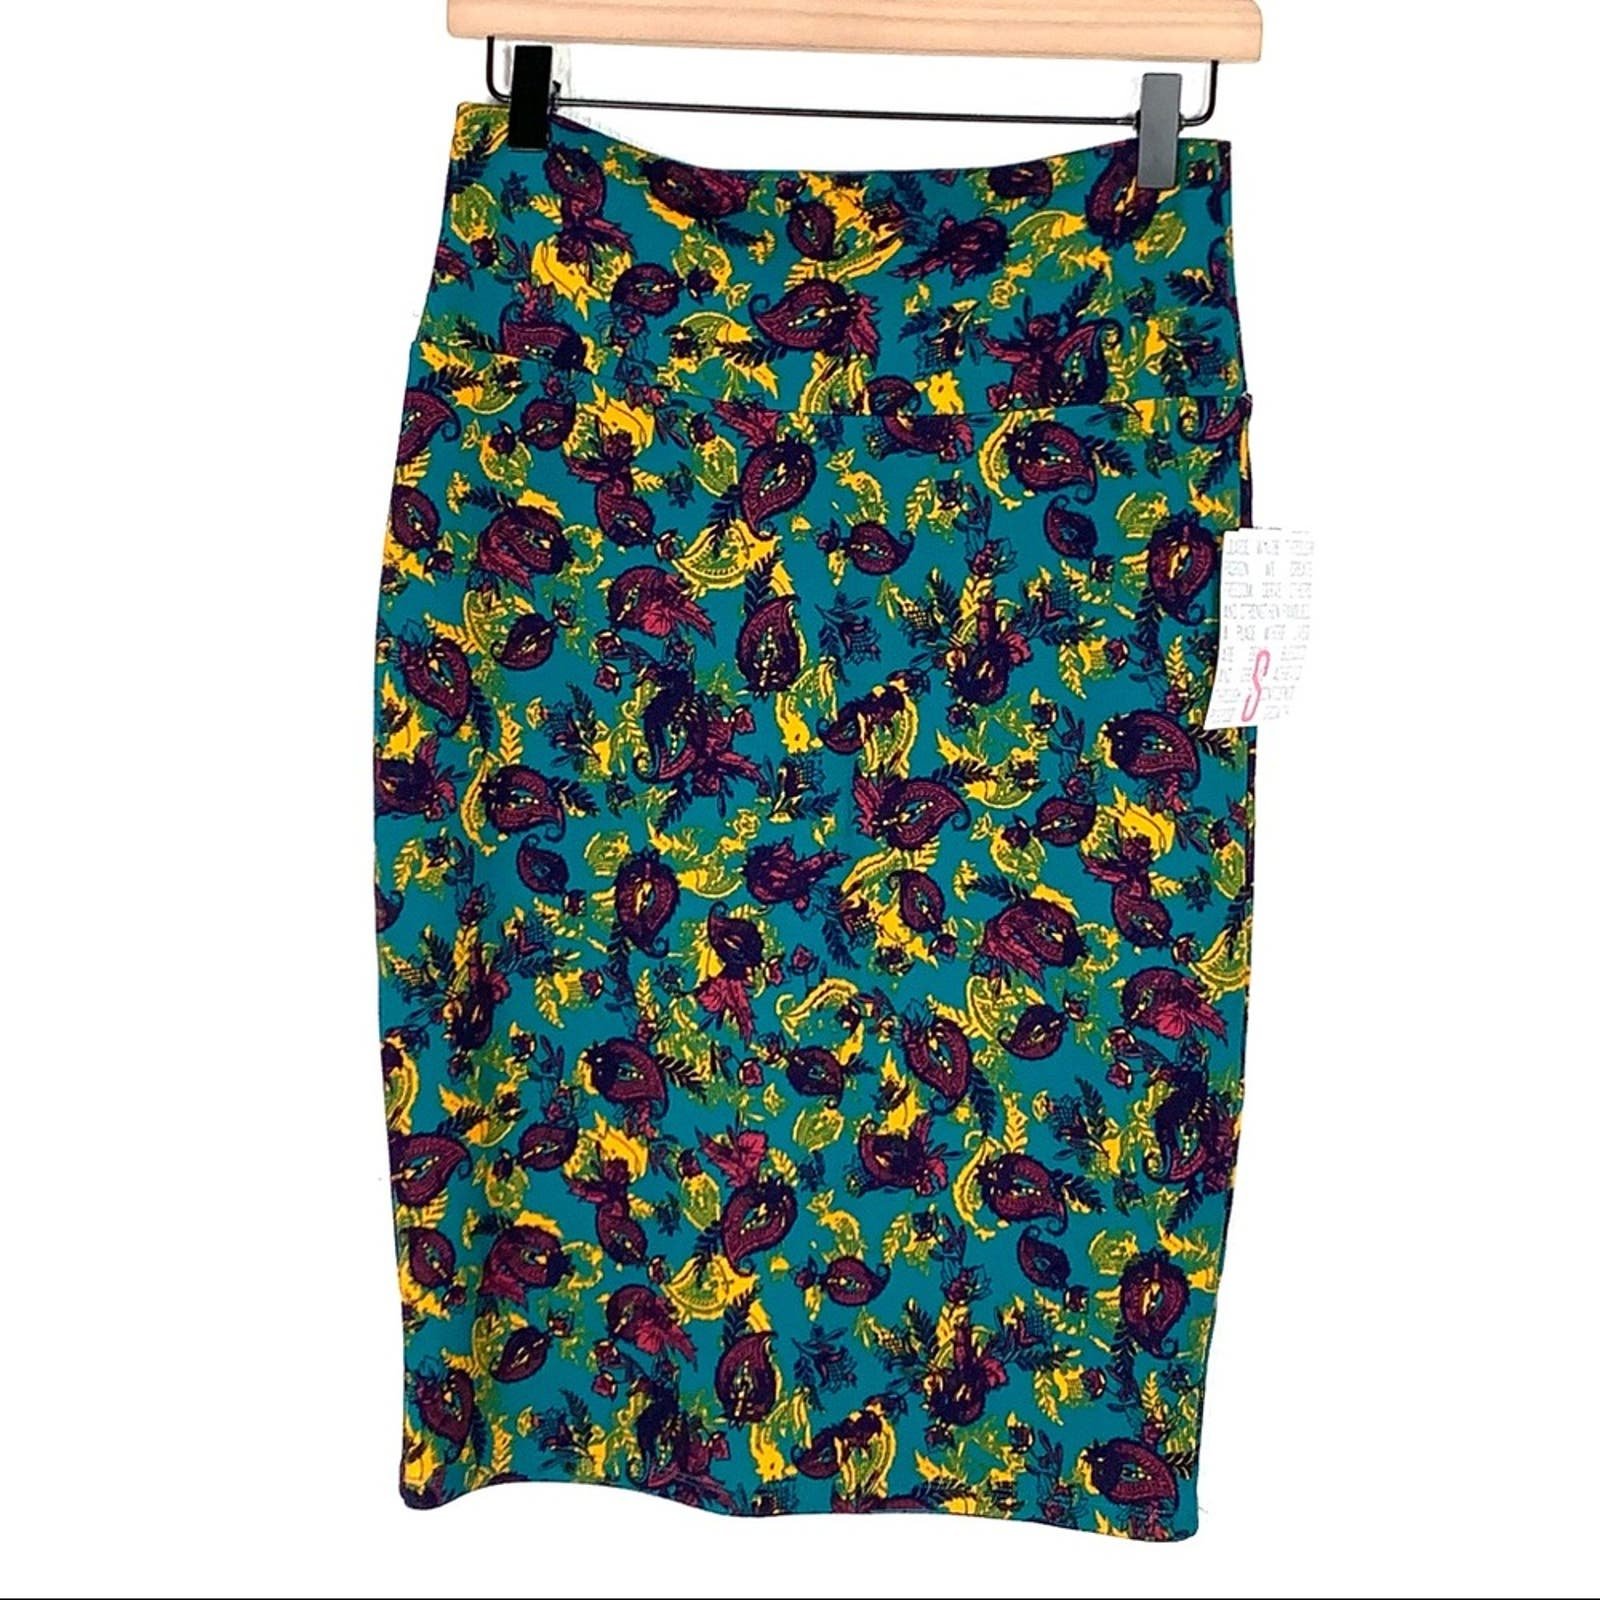 Nice NWT LulaRoe Cassie green and purple paisley pencil skirt size small S PQLzqG466 US Outlet